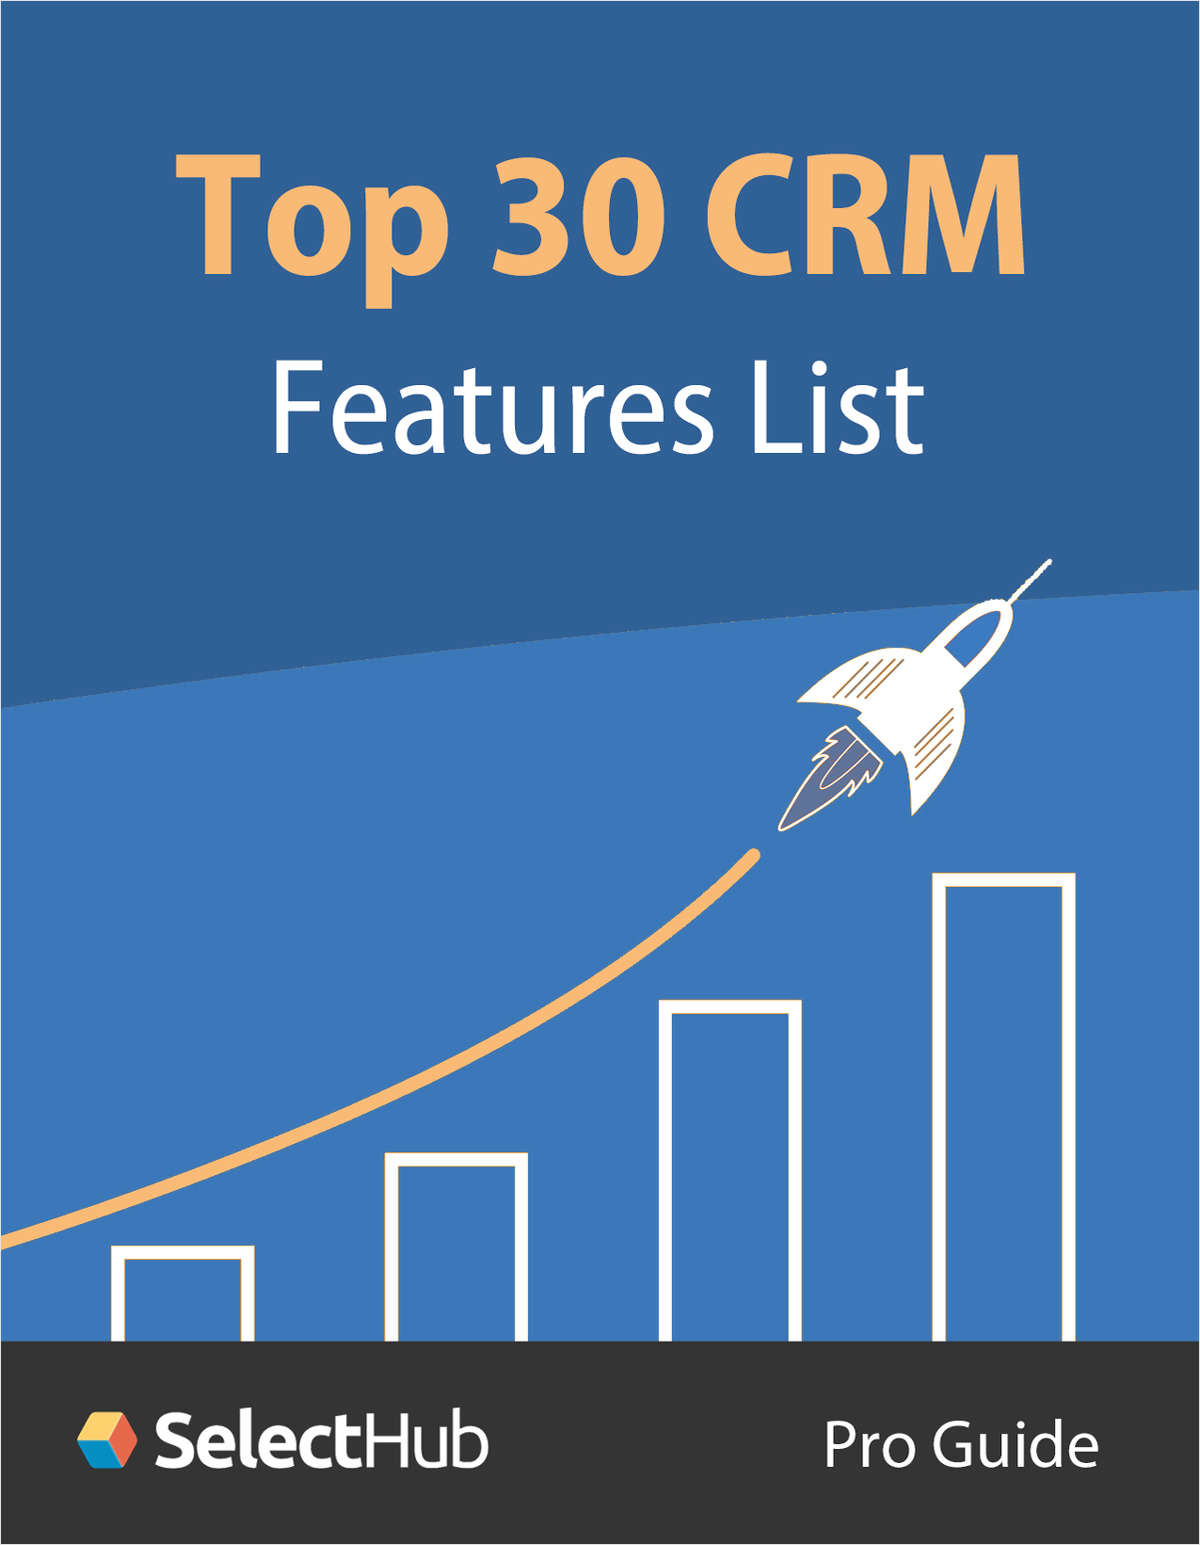 Top 30 CRM Features List: An Essential Guide for Your Next CRM System